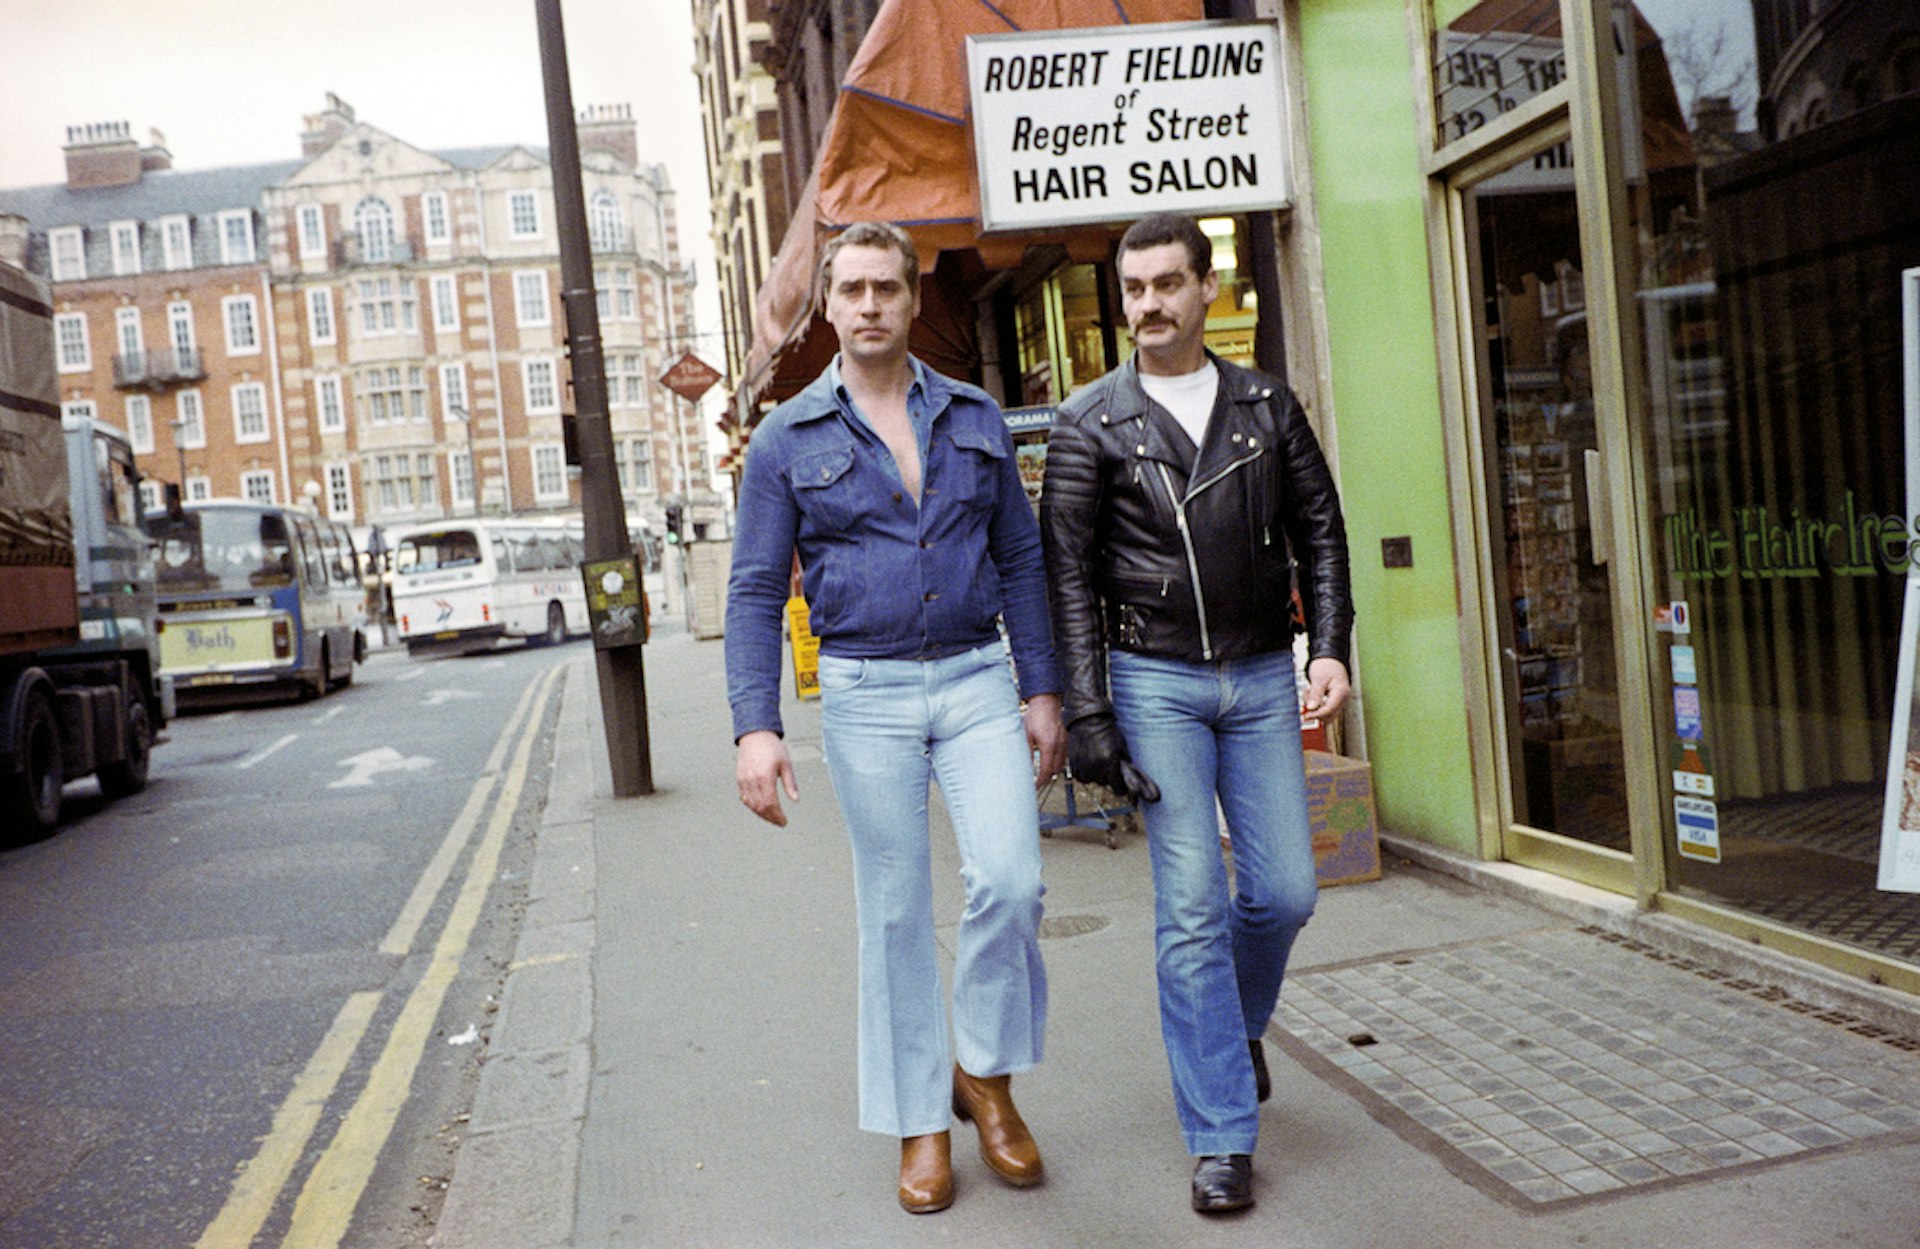 Snapshots of London’s streets during Thatcher’s Britain